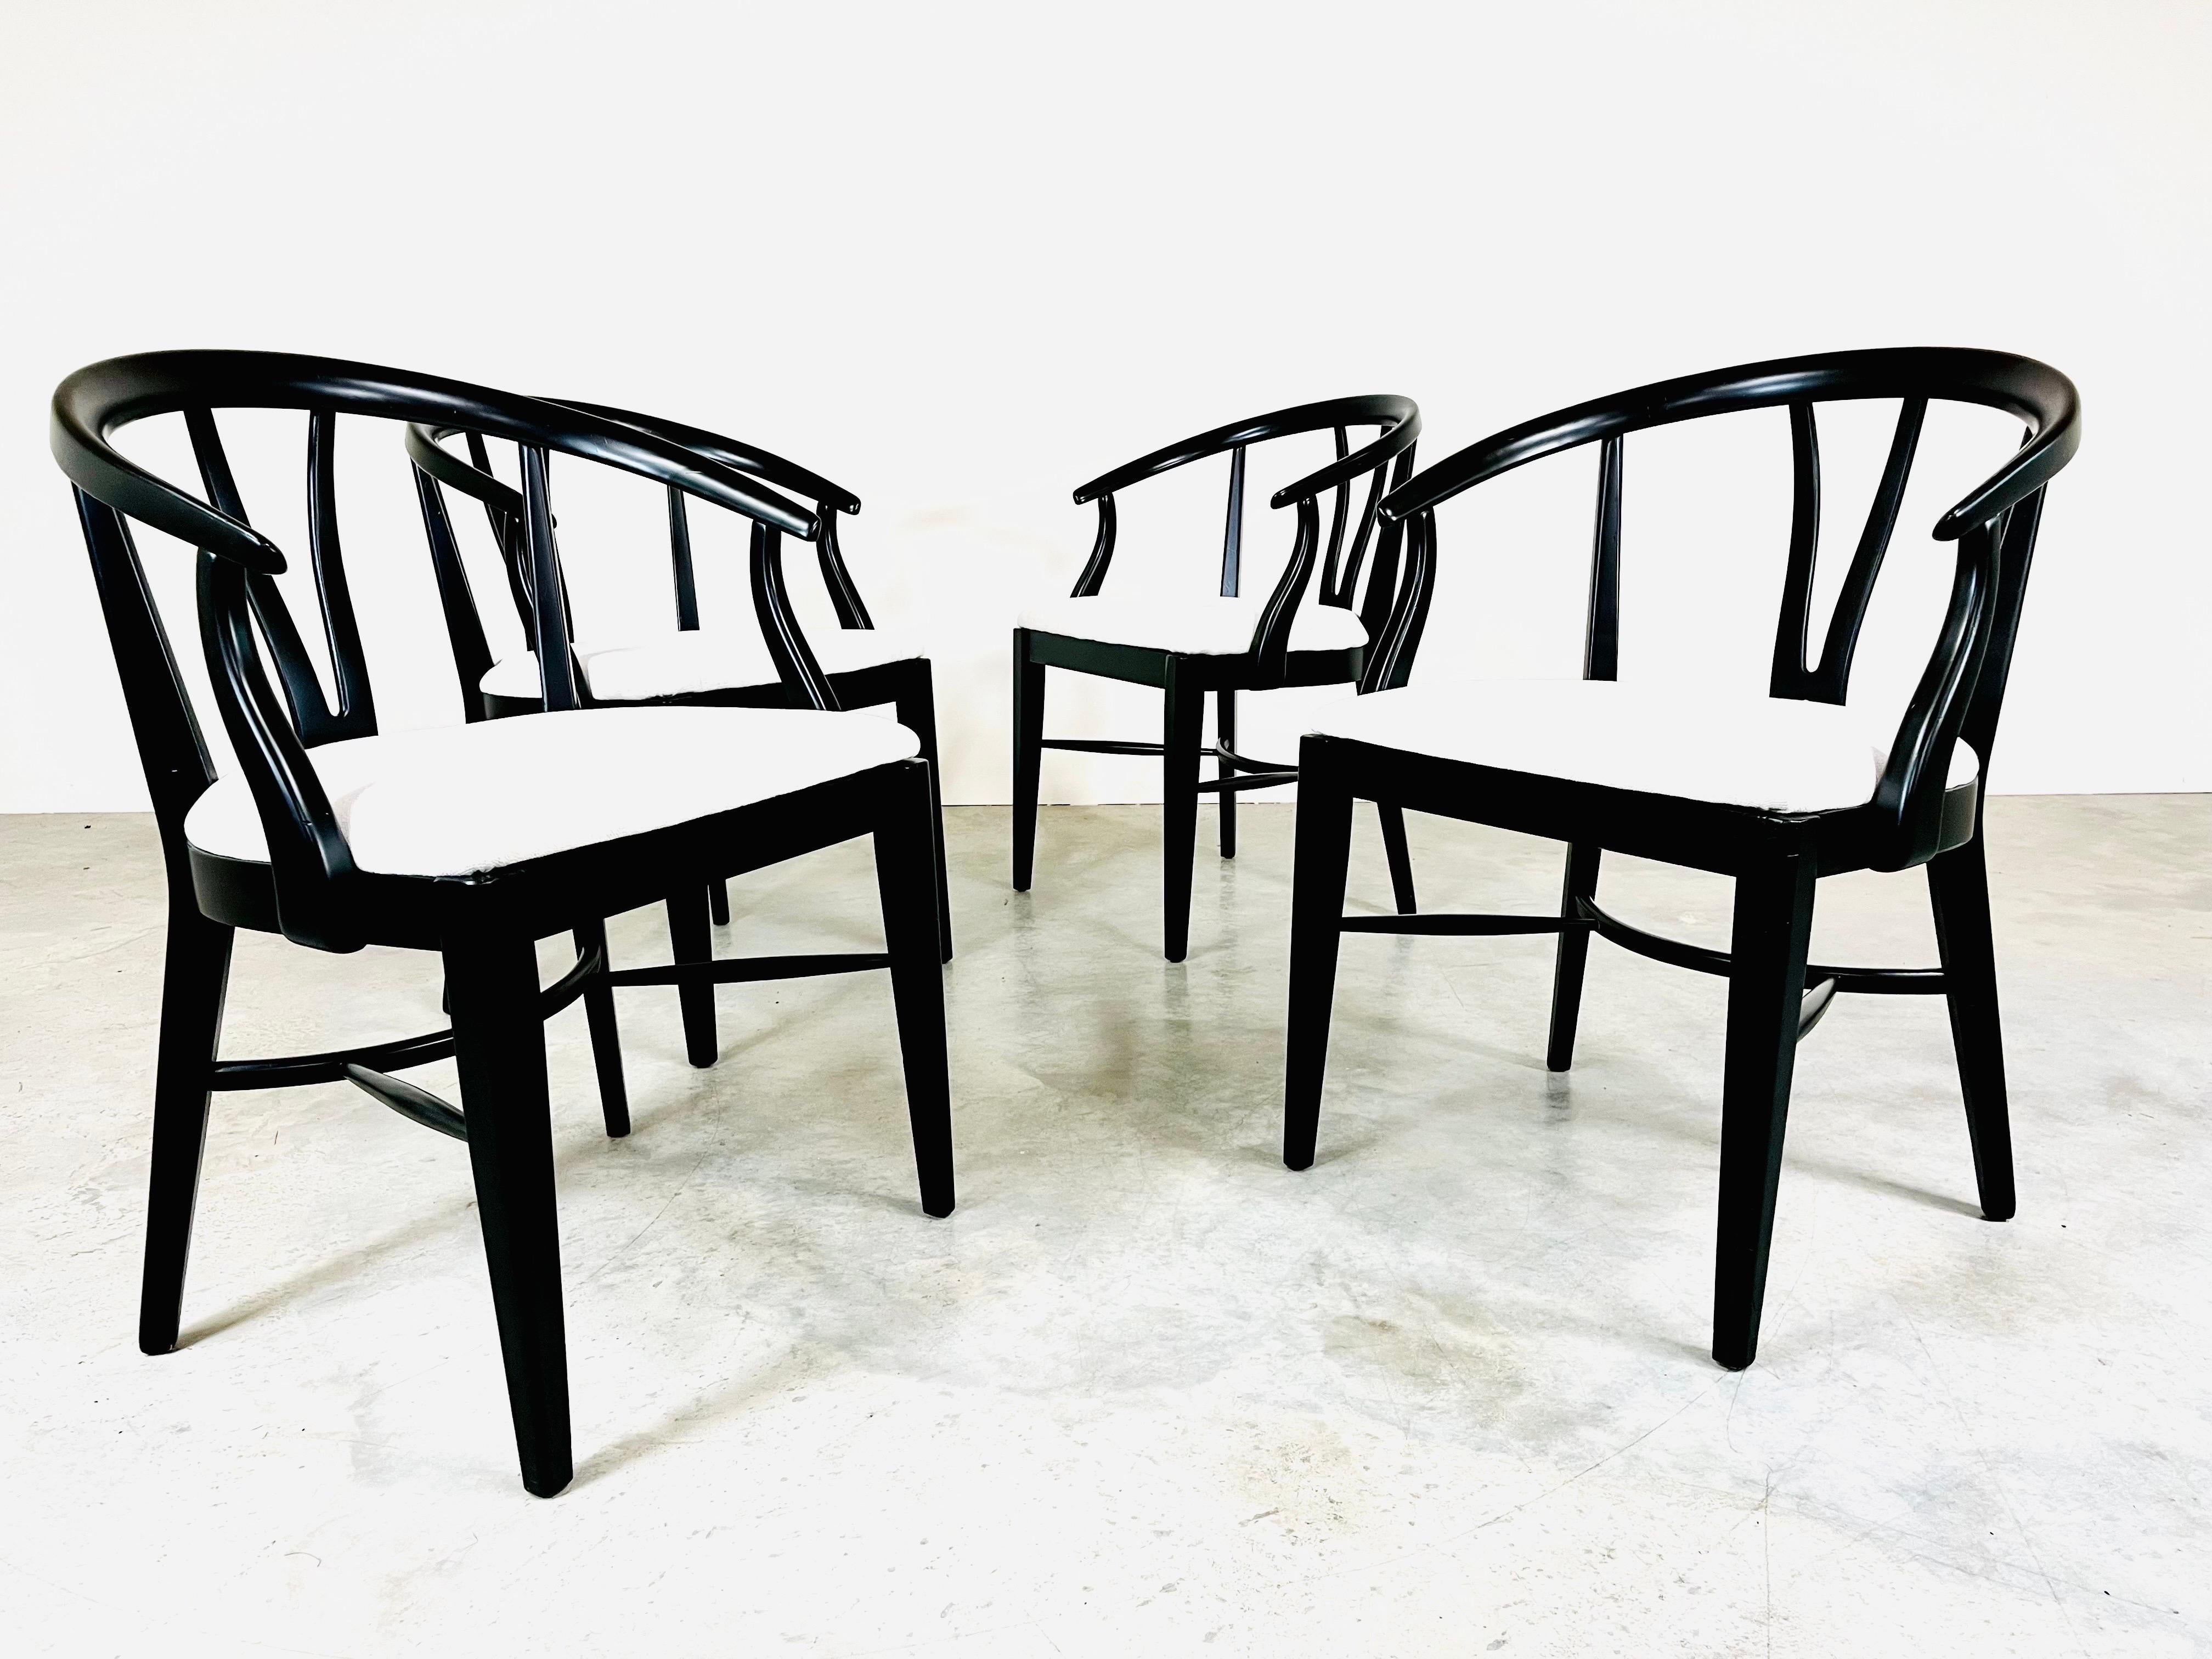 American Hans Wegner Wishbone Style Dining or Game Armchairs by Blowing Rock, circa 196